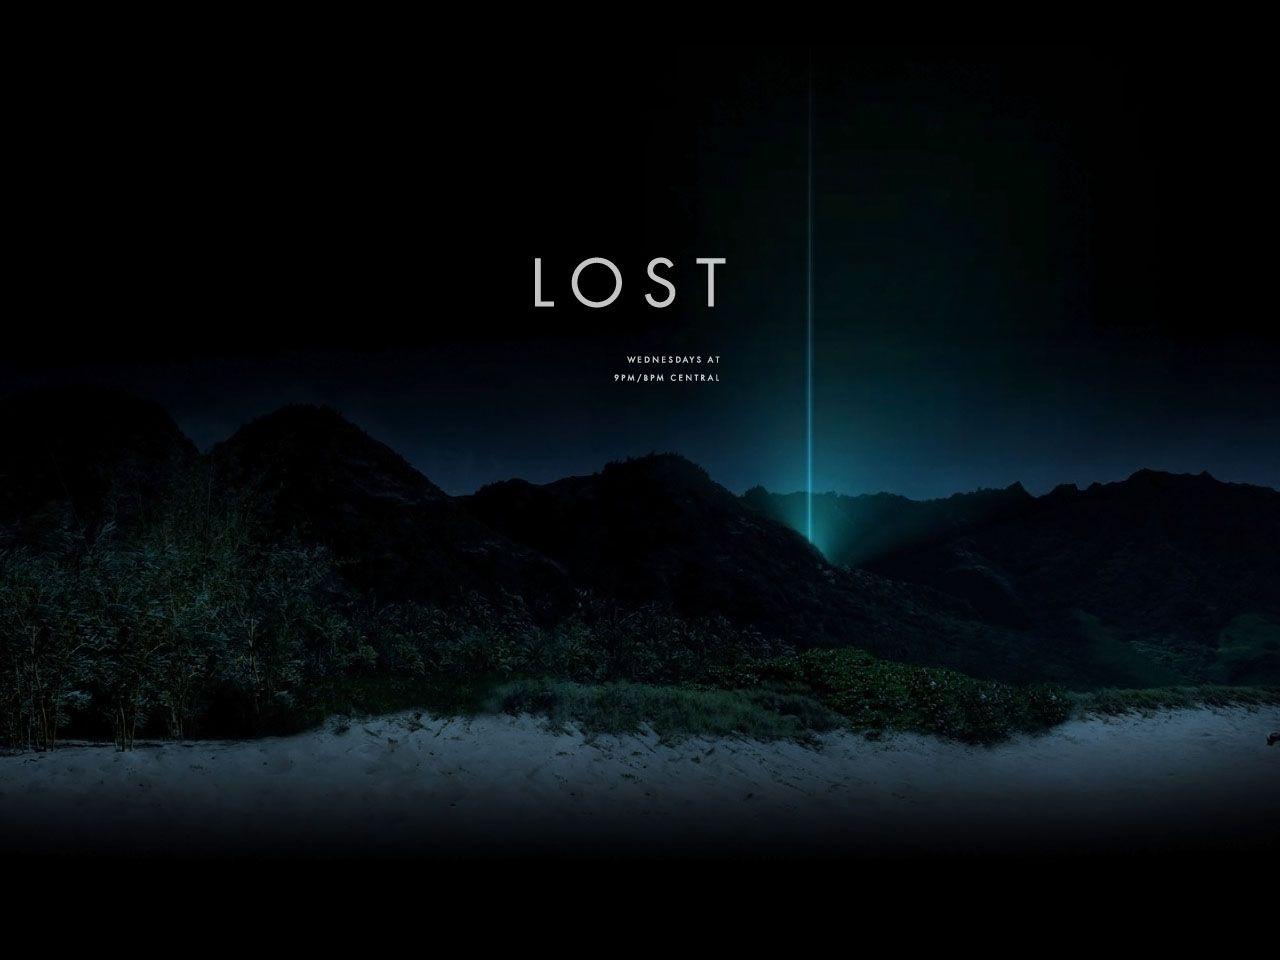 Lost image the lost HD wallpapers and backgrounds photos